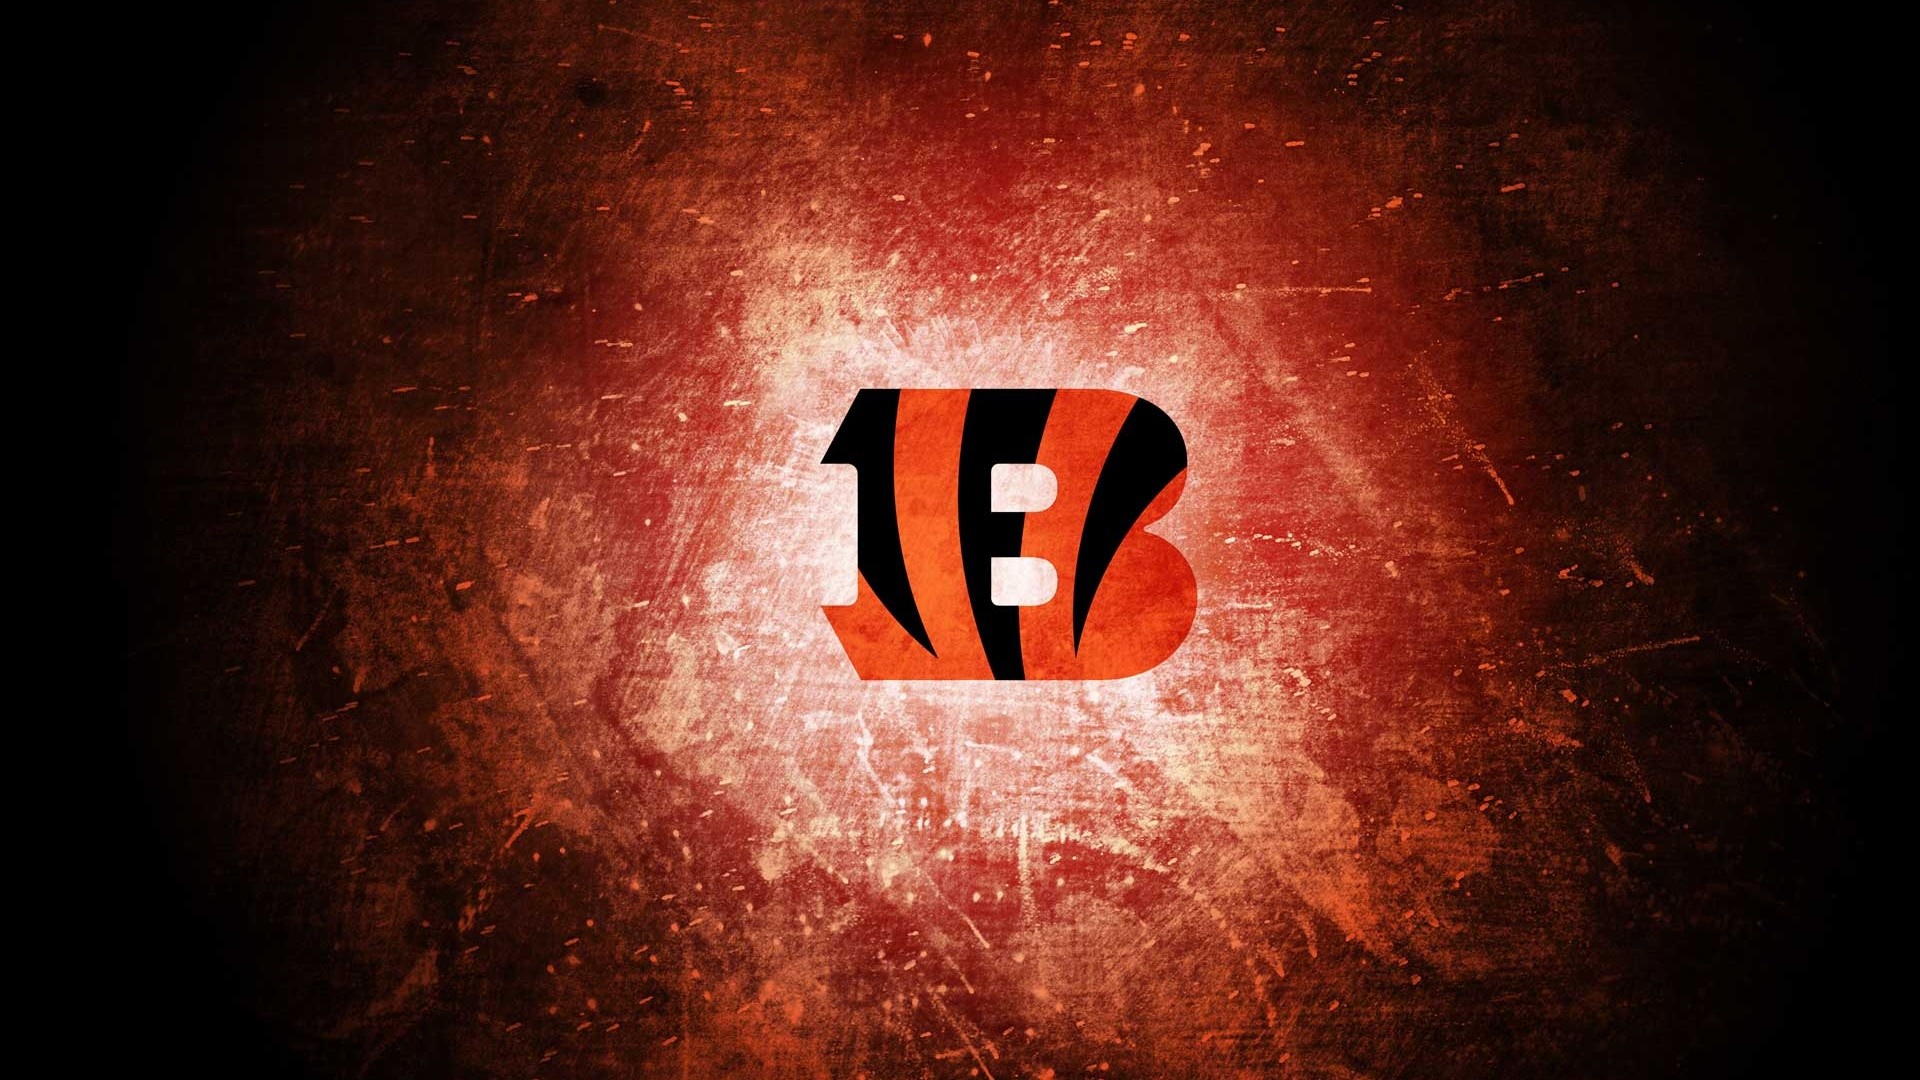 1920x1080 free images bengals logo wallpapers download high definiton wallpapers  windows 10 backgrounds 4k download wallpapers computer